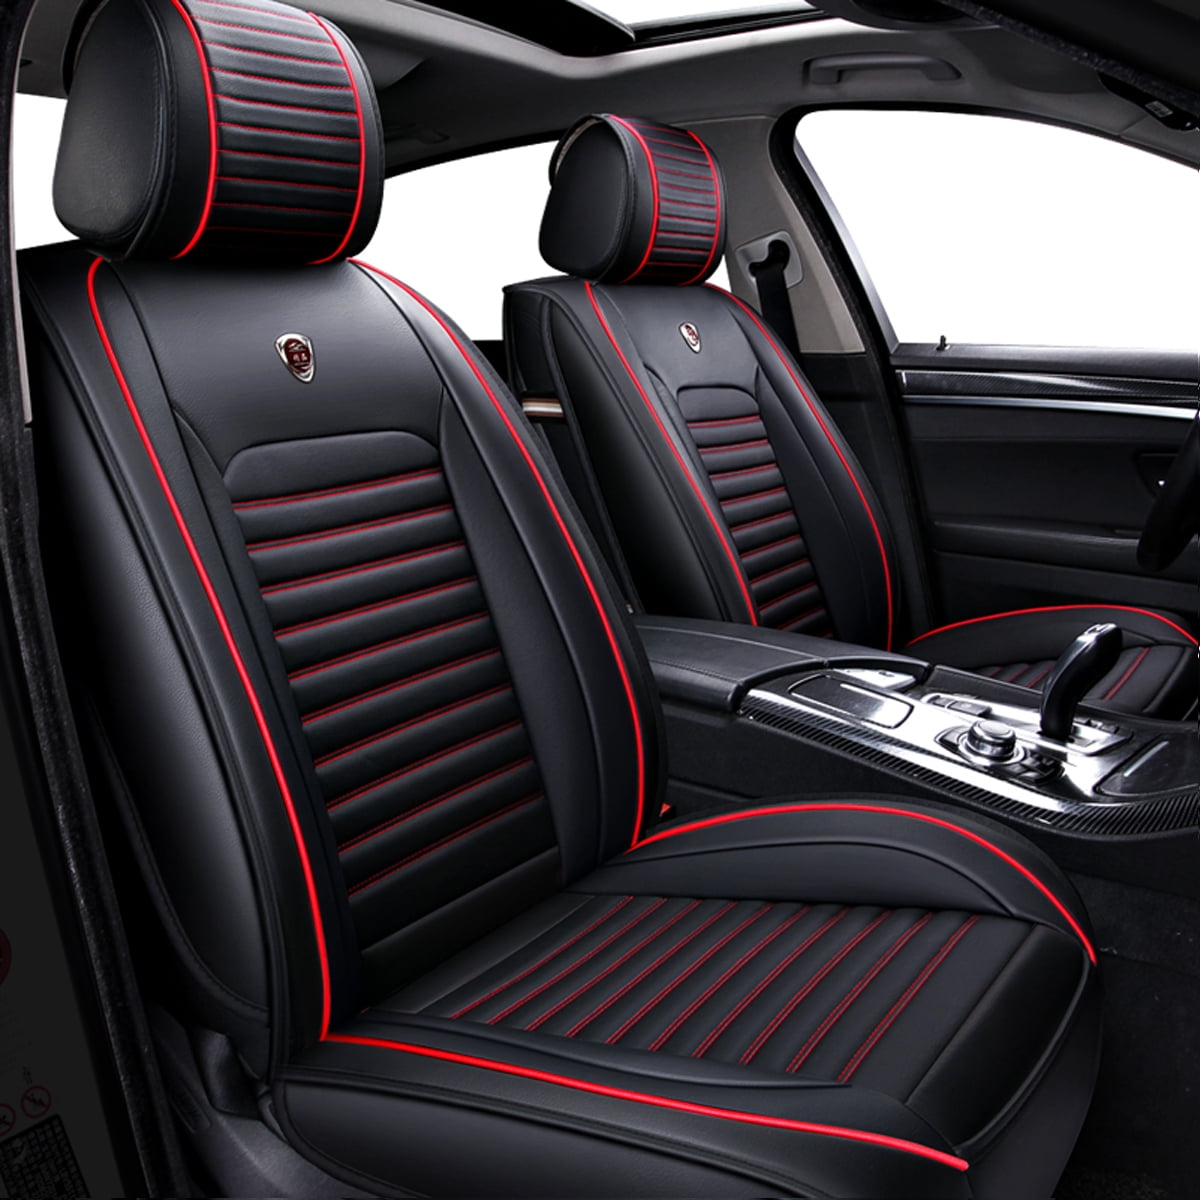 Motor Trend Car Seat Covers for Auto Truck SUV, Black Faux Leather Front  Seat Covers for Cars, 2-Pack Padded Car Seat Protector Cushion